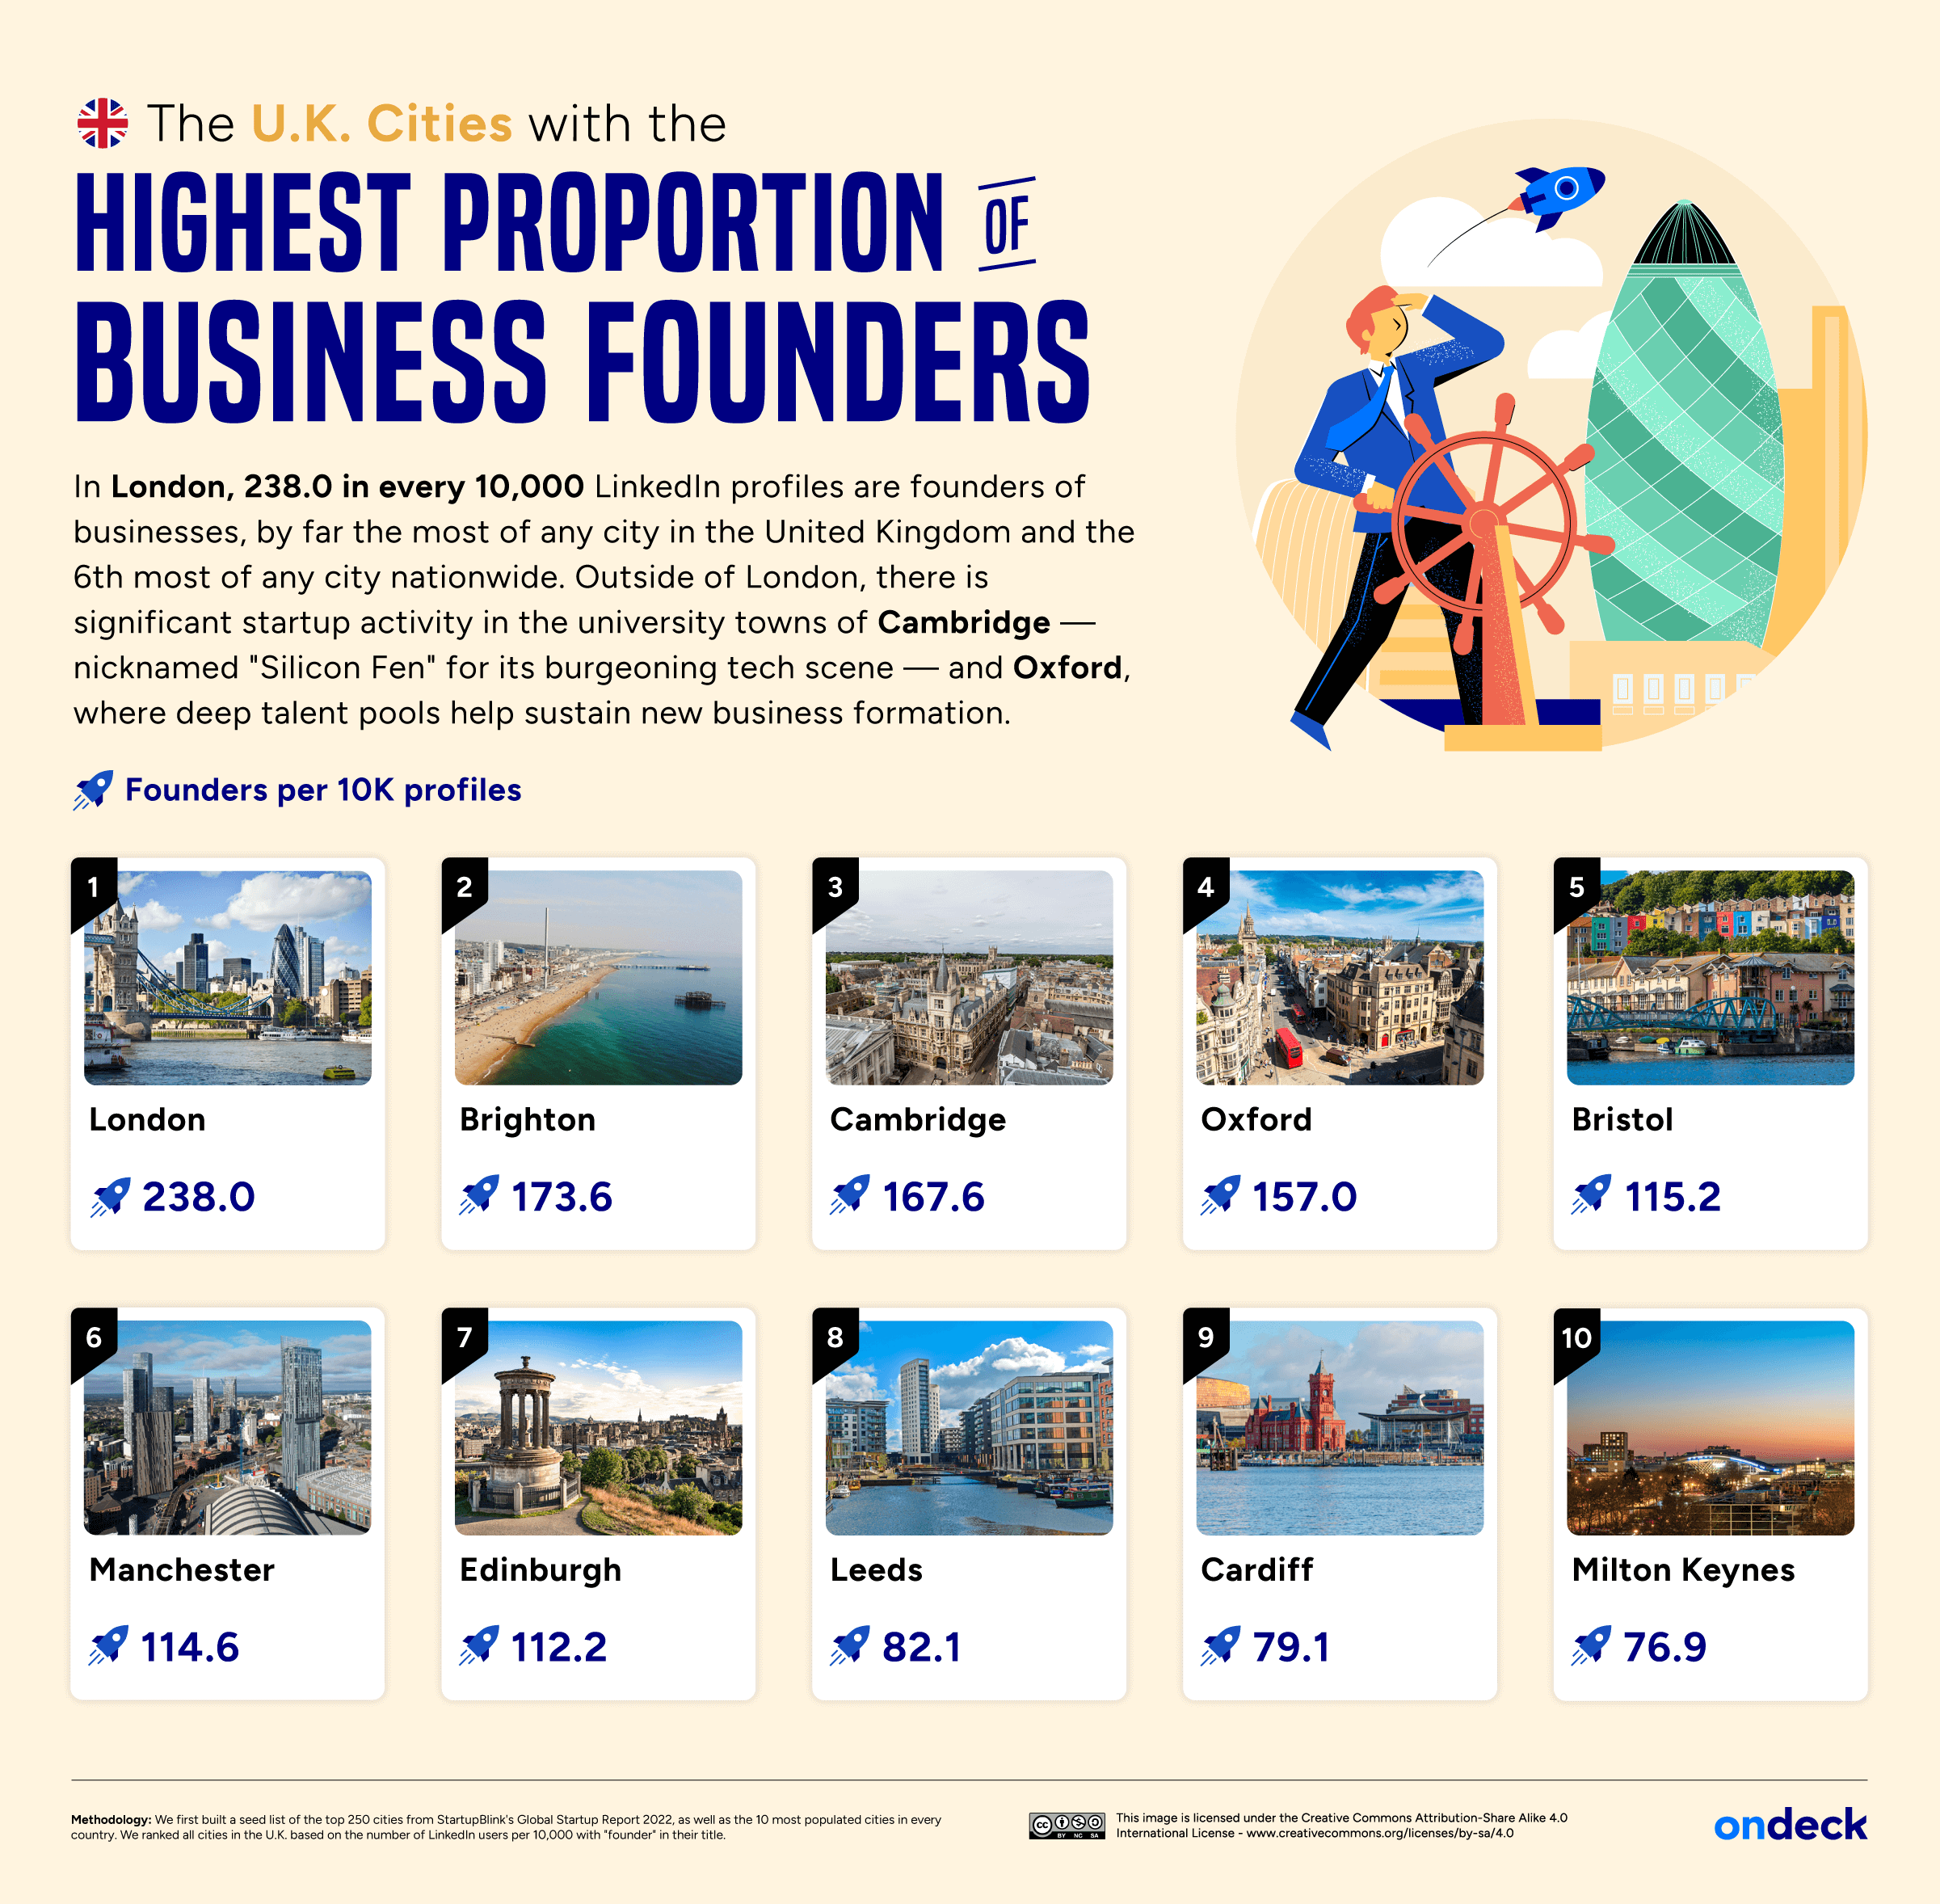 Infographic showing the U.K. cities with the most business founders